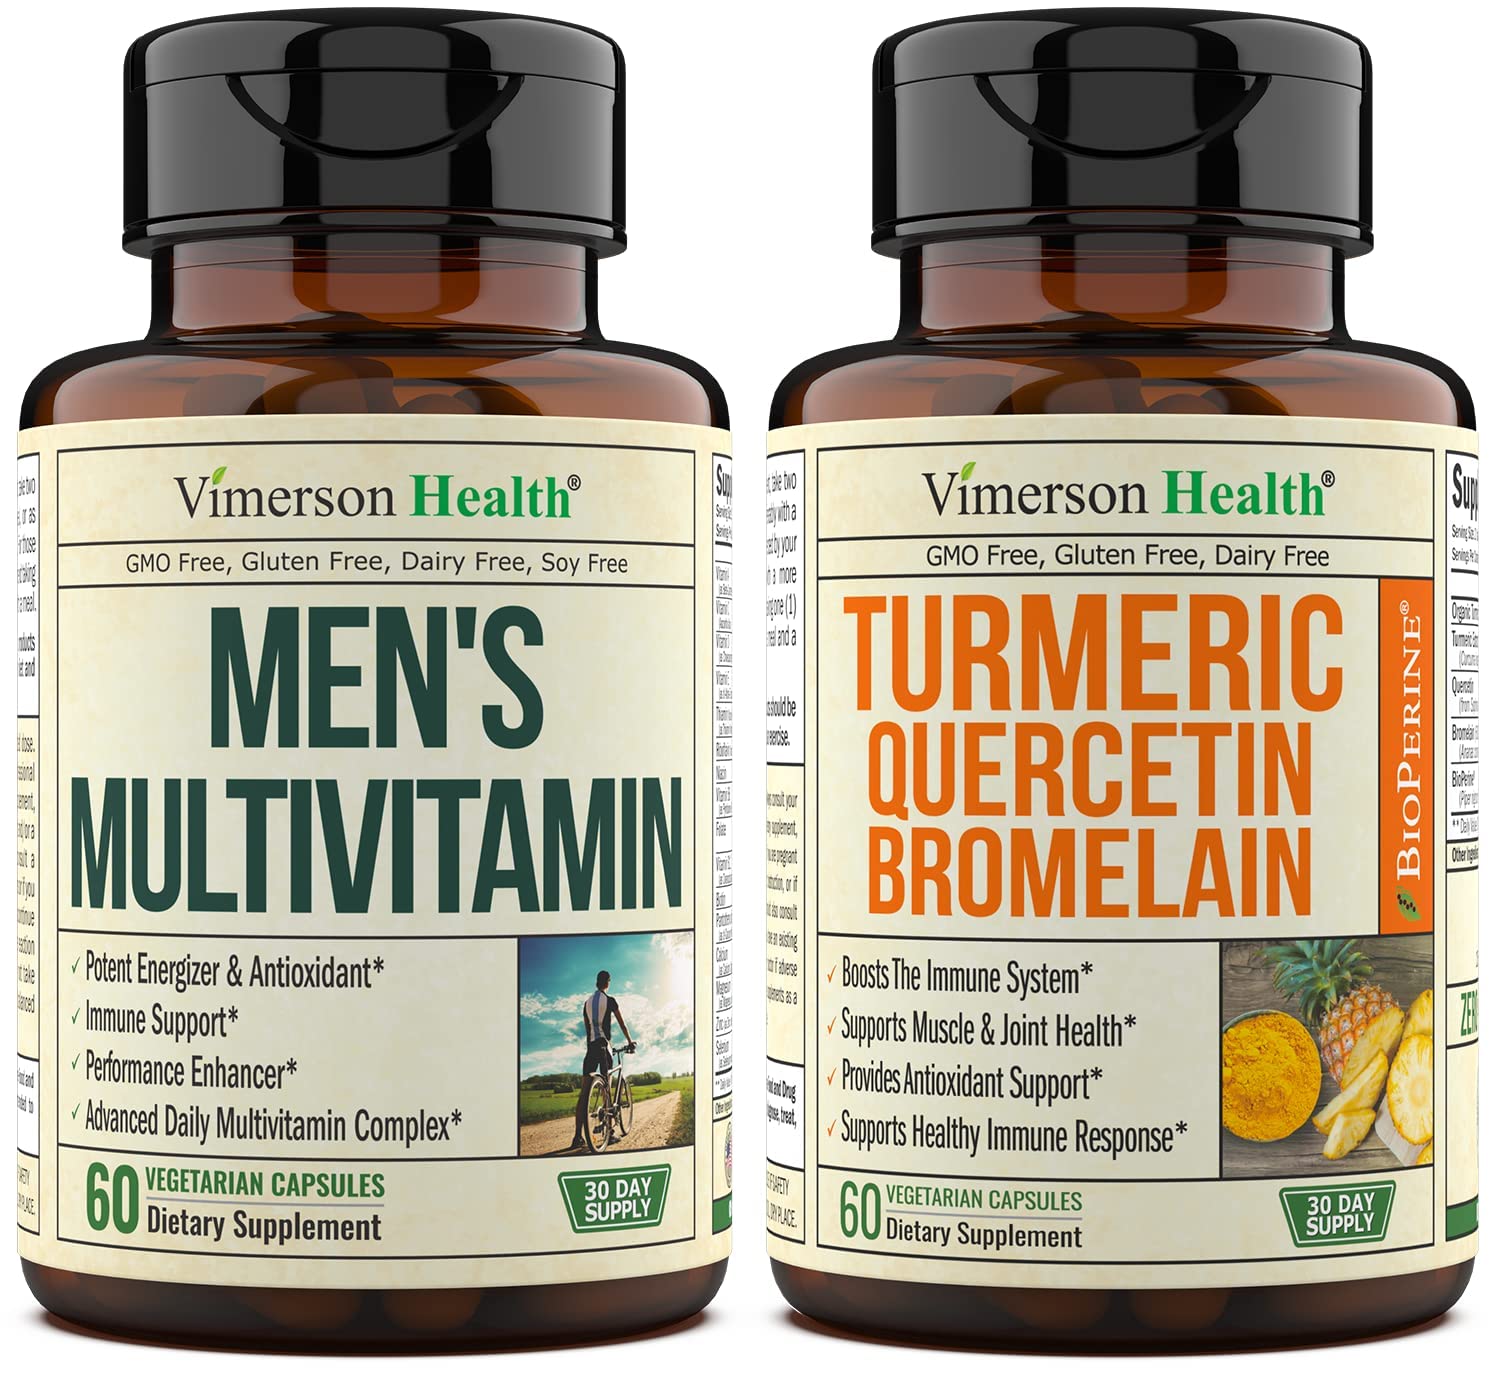 Vimerson Health Men's Multivitamin + Turmeric Bromelain Quercetin Bundle. Supports Healthy Immune Response, Helps with Energy & Performance, Muscle and Joint Health, Antioxidant Properties